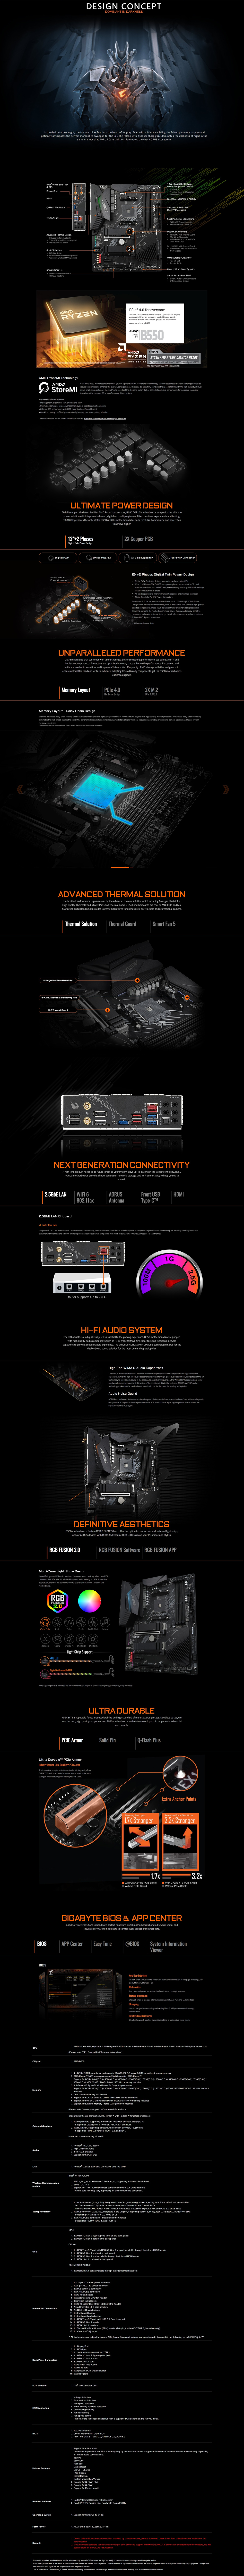 A large marketing image providing additional information about the product Gigabyte B550 Aorus Elite AX V2 AM4 ATX Desktop Motherboard - Additional alt info not provided